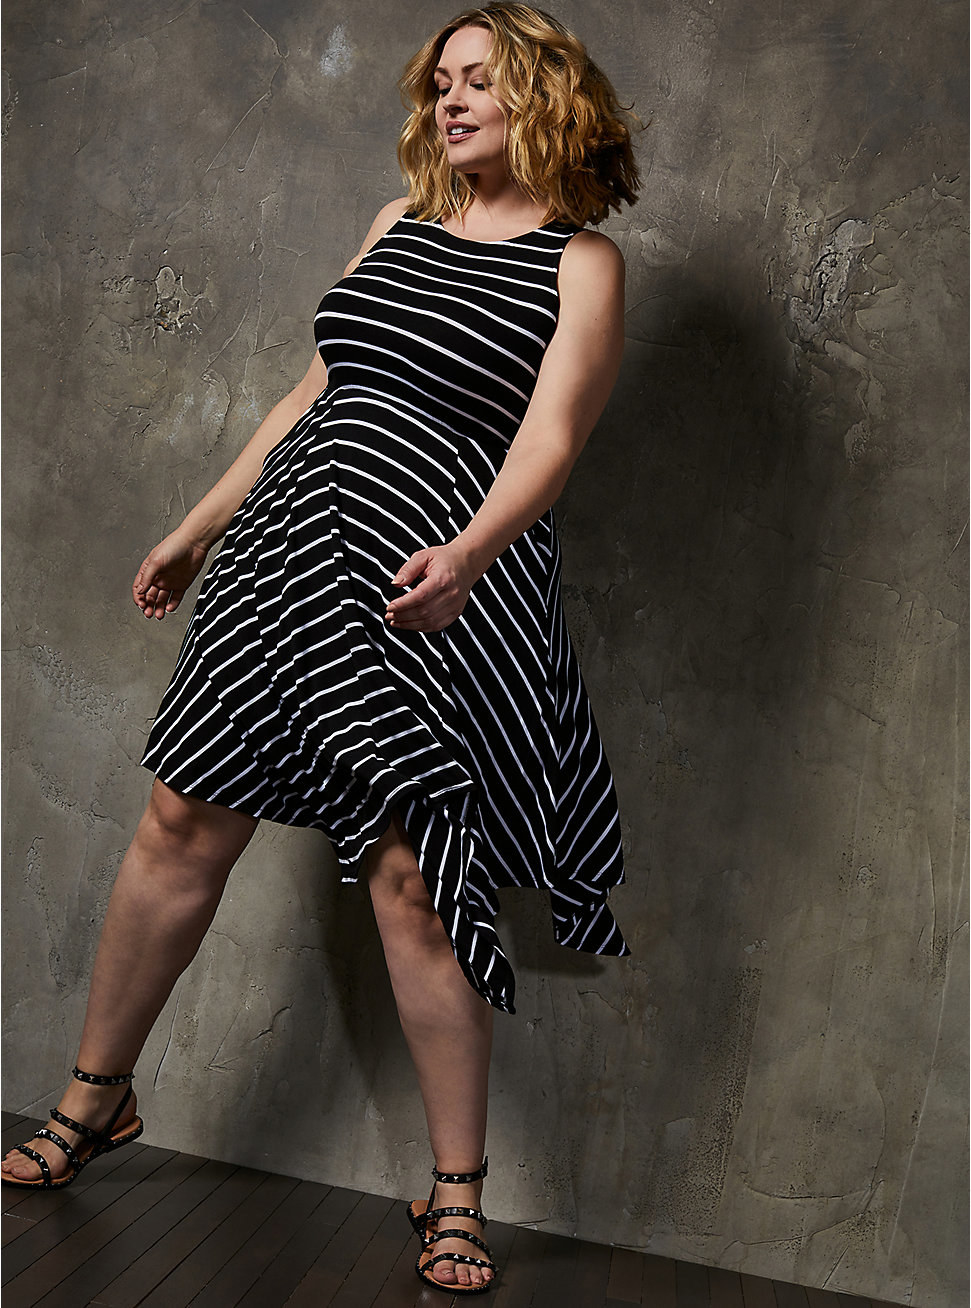 a model wearing the black dress with white stripes with sandals